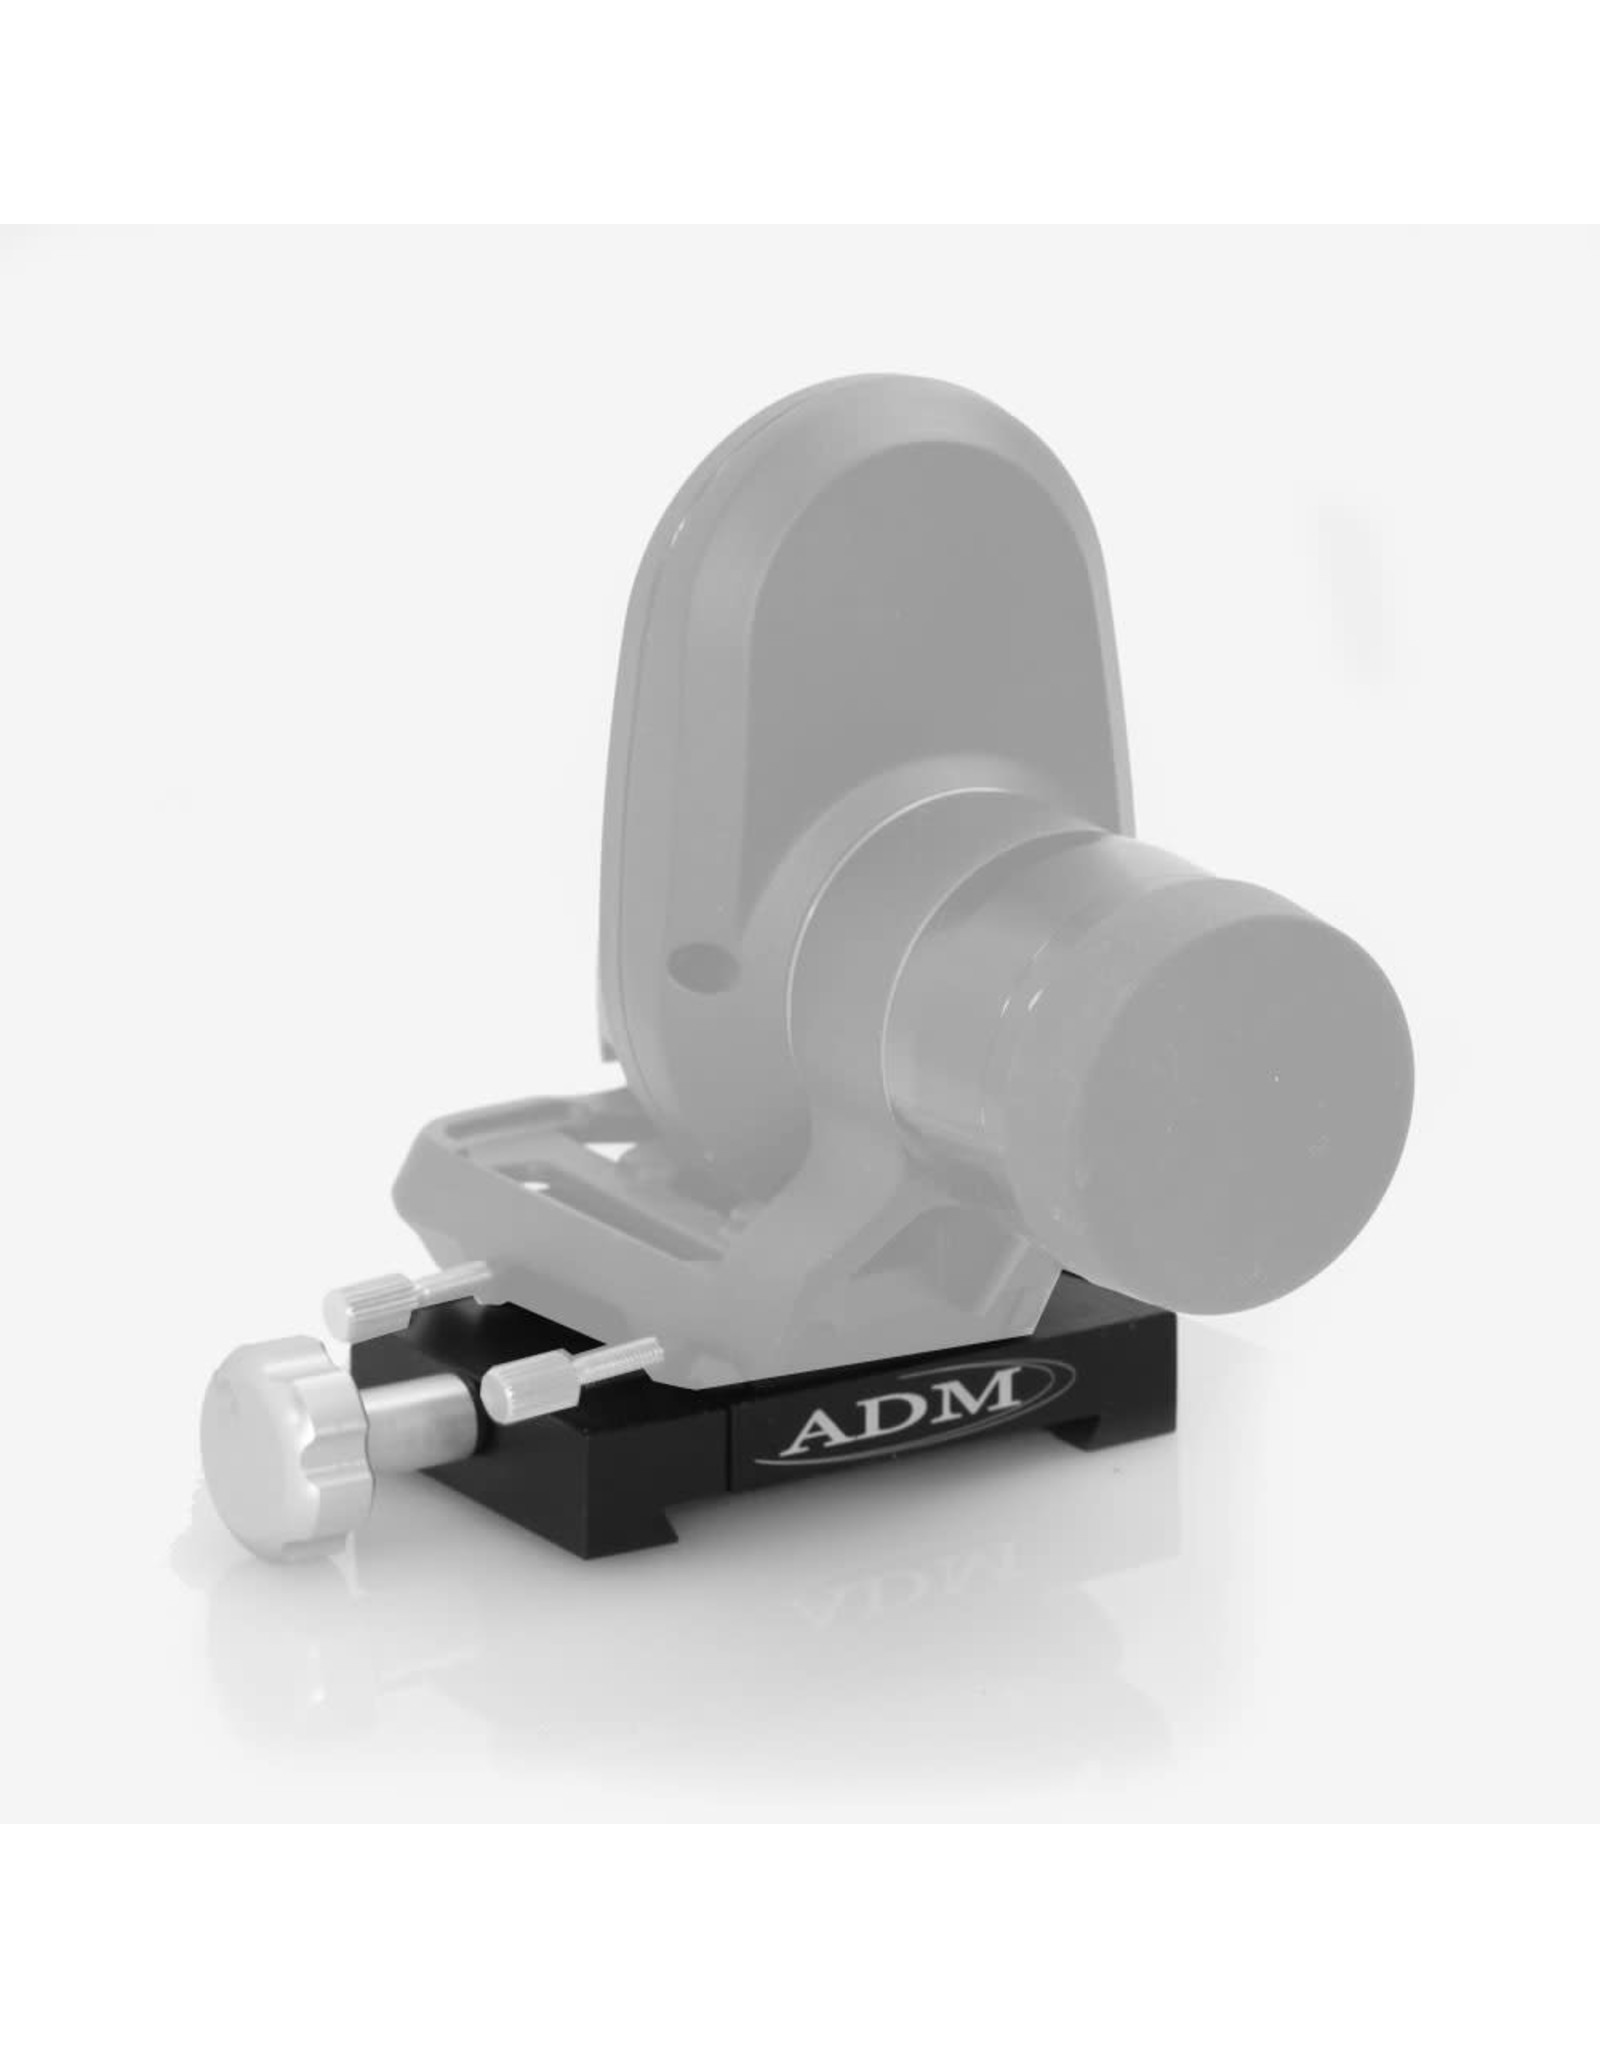 ADM ADM D Series Dovetail Adapter for StarSense Mounting - DPA-SS